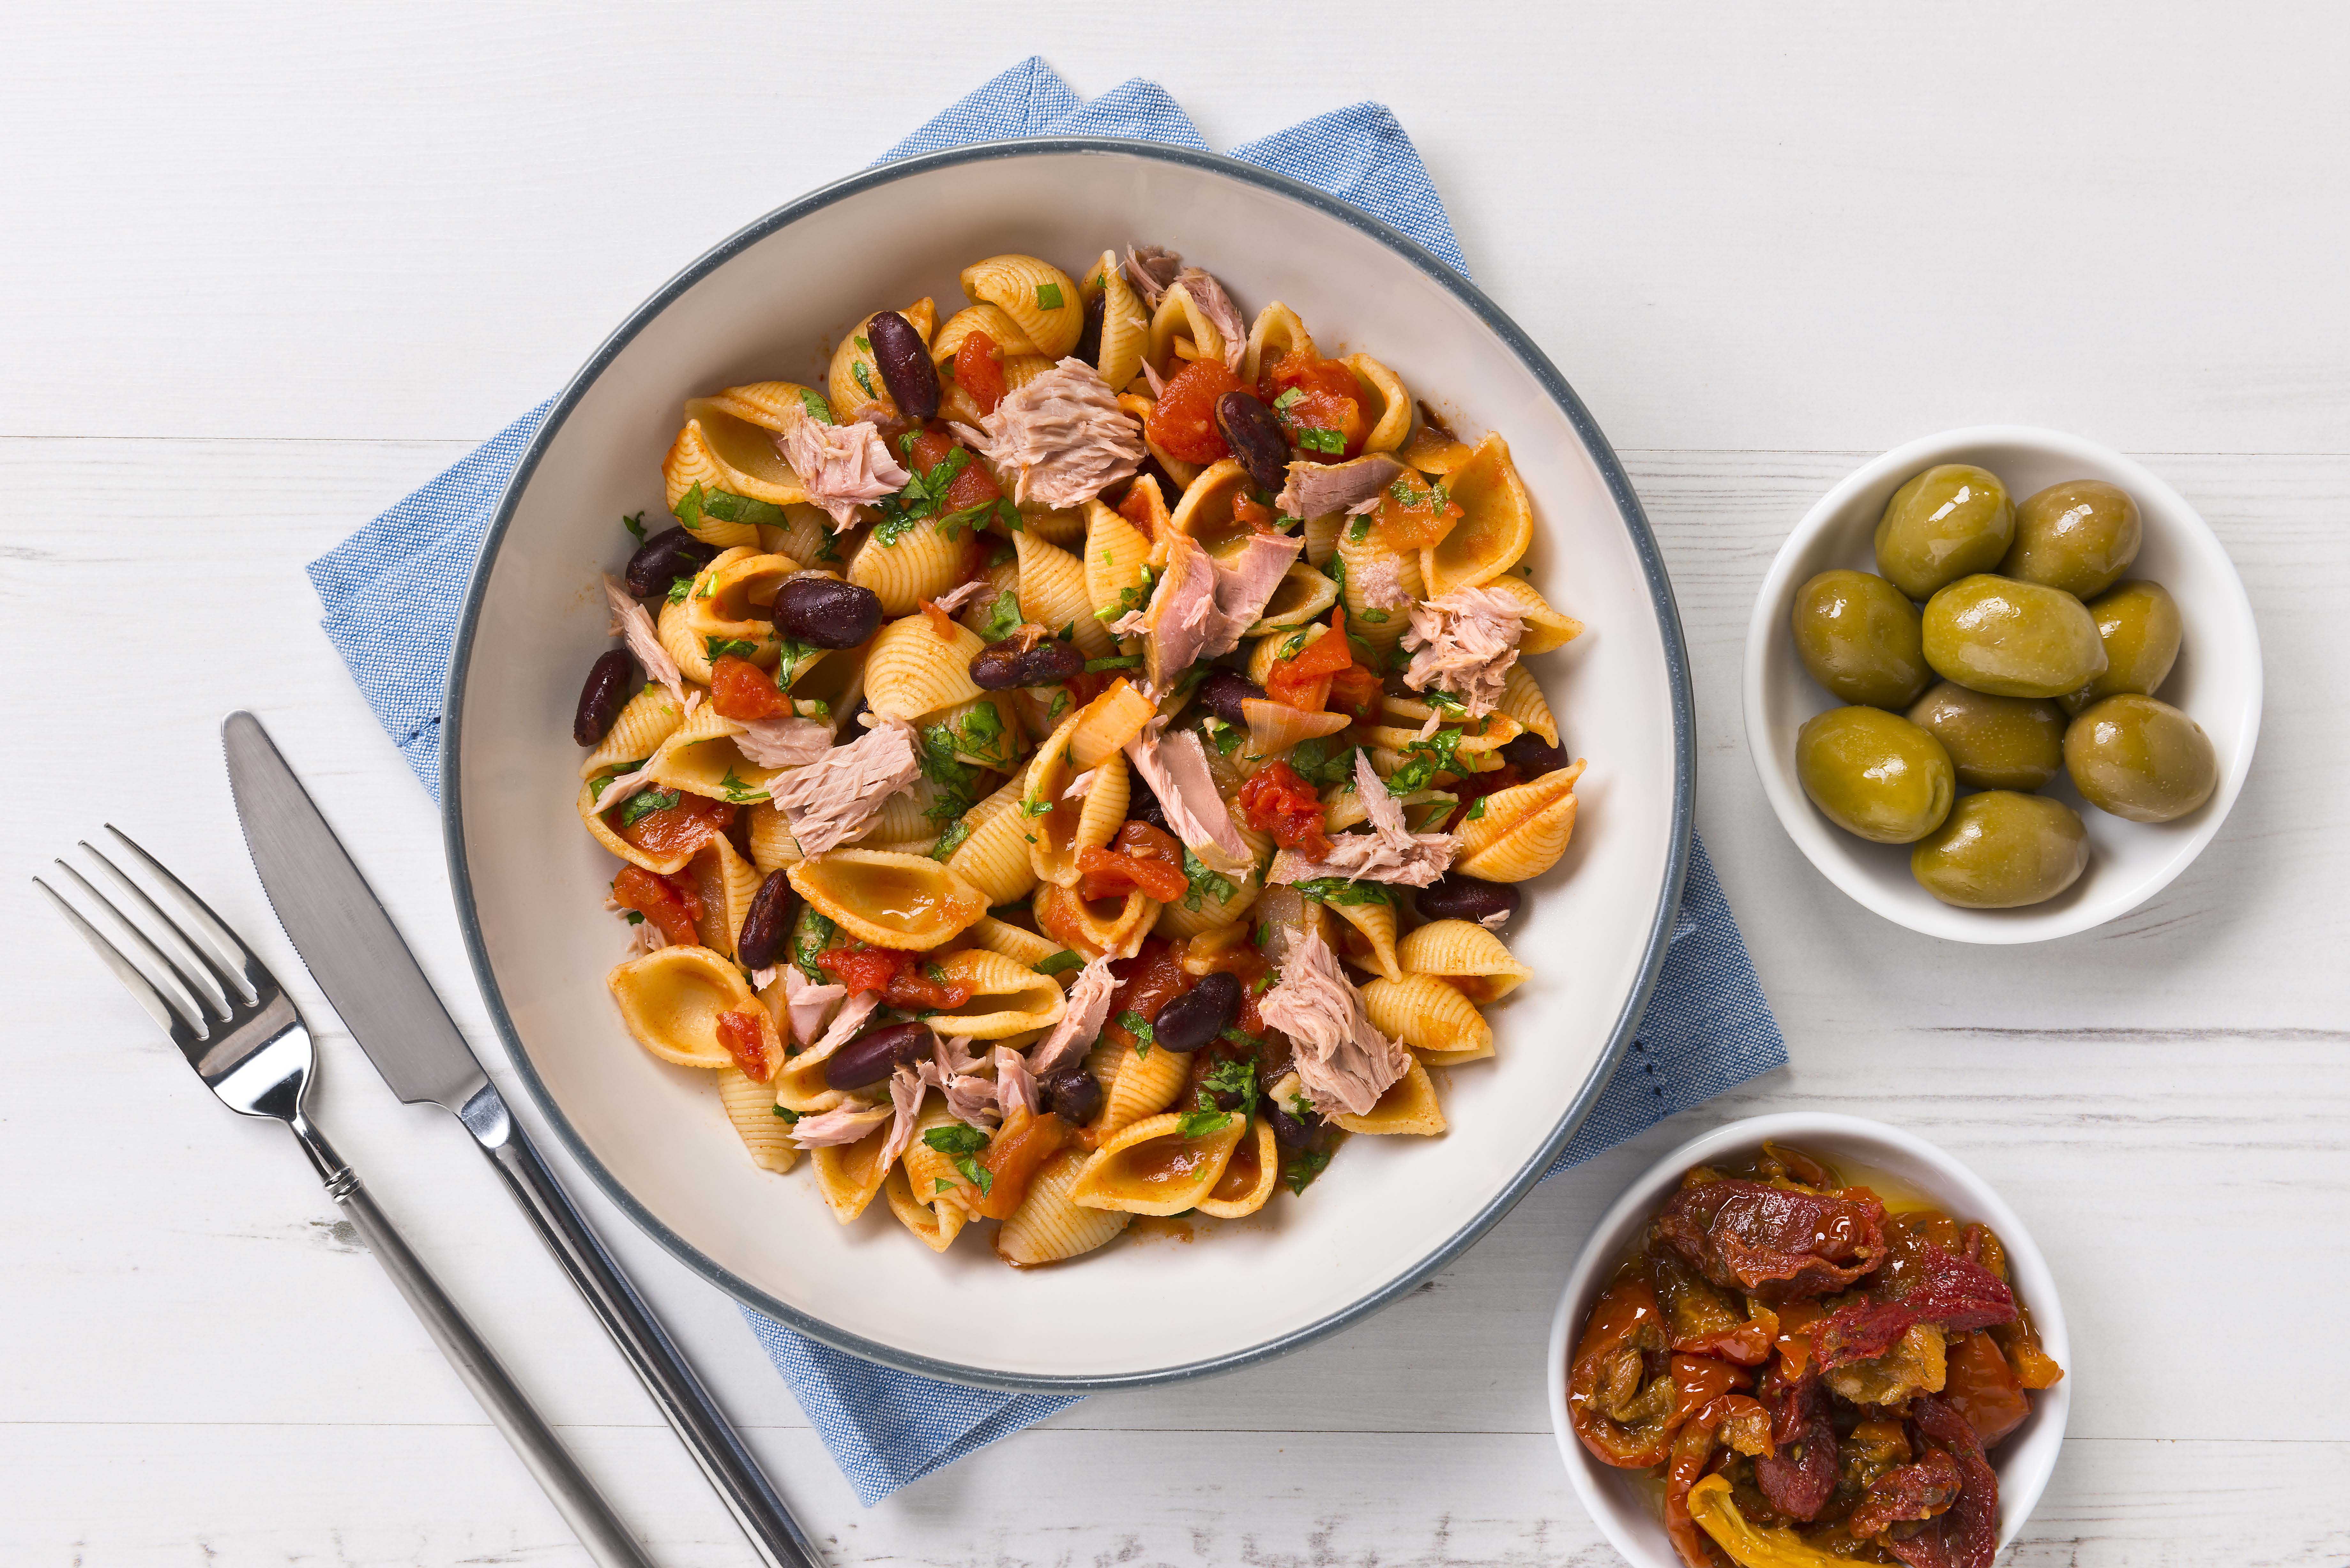 A serving of pasta with tuna and beans and olives on the side